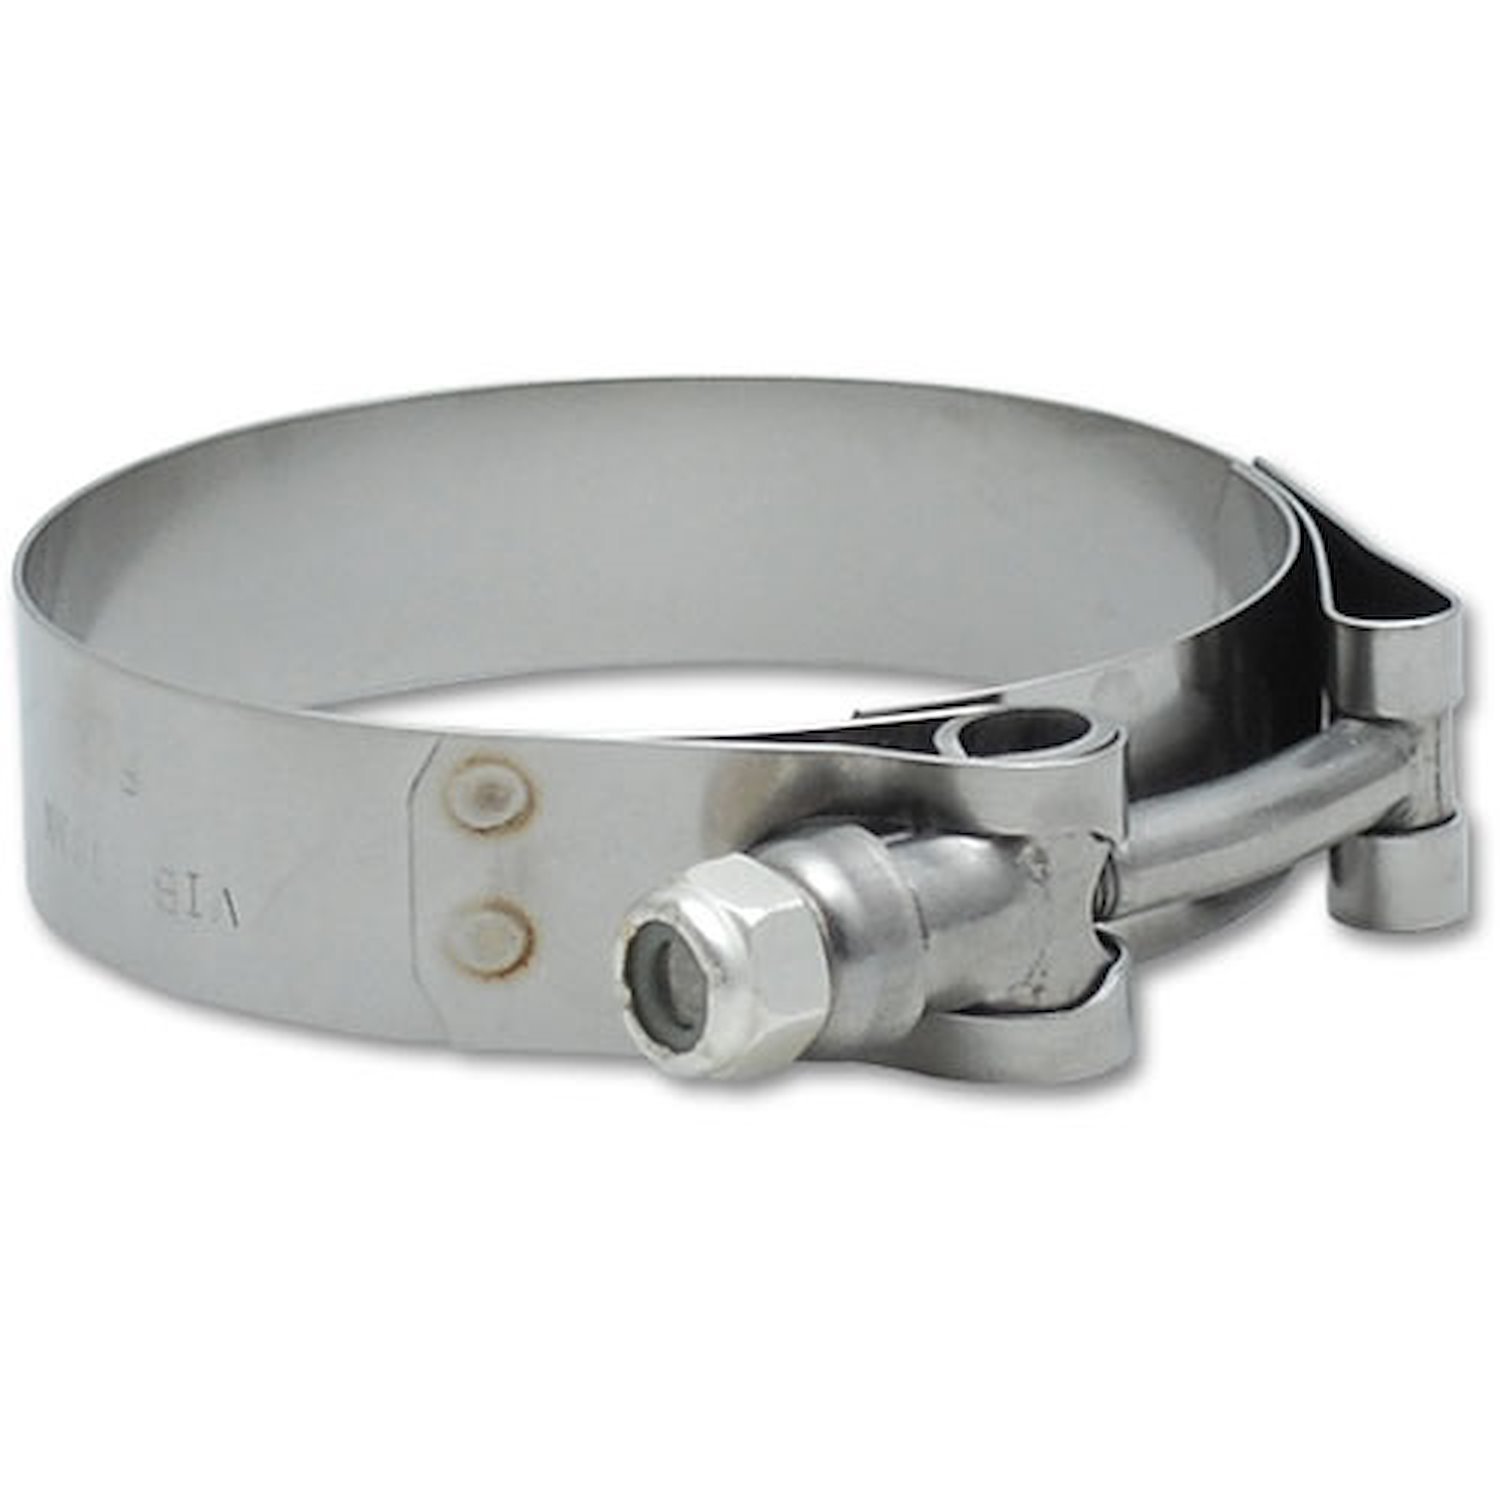 Stainless Steel T-Bolt Clamps Clamp Range 5.30" - 5.60"